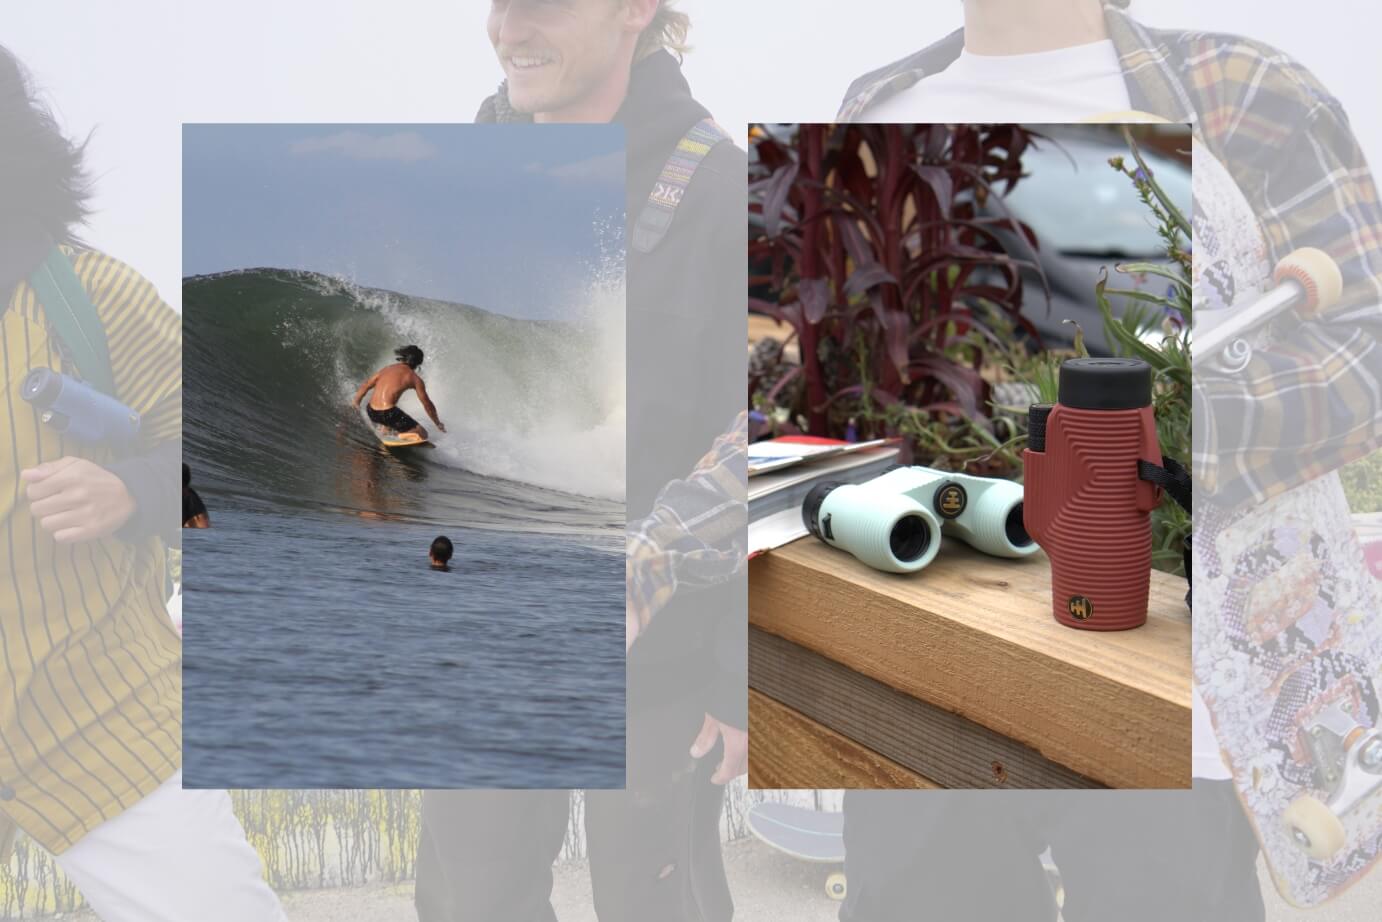 Artisitc photo collage of Boom surfing on one side, and multiple kinds of Nocs products on a ledge on his balcony